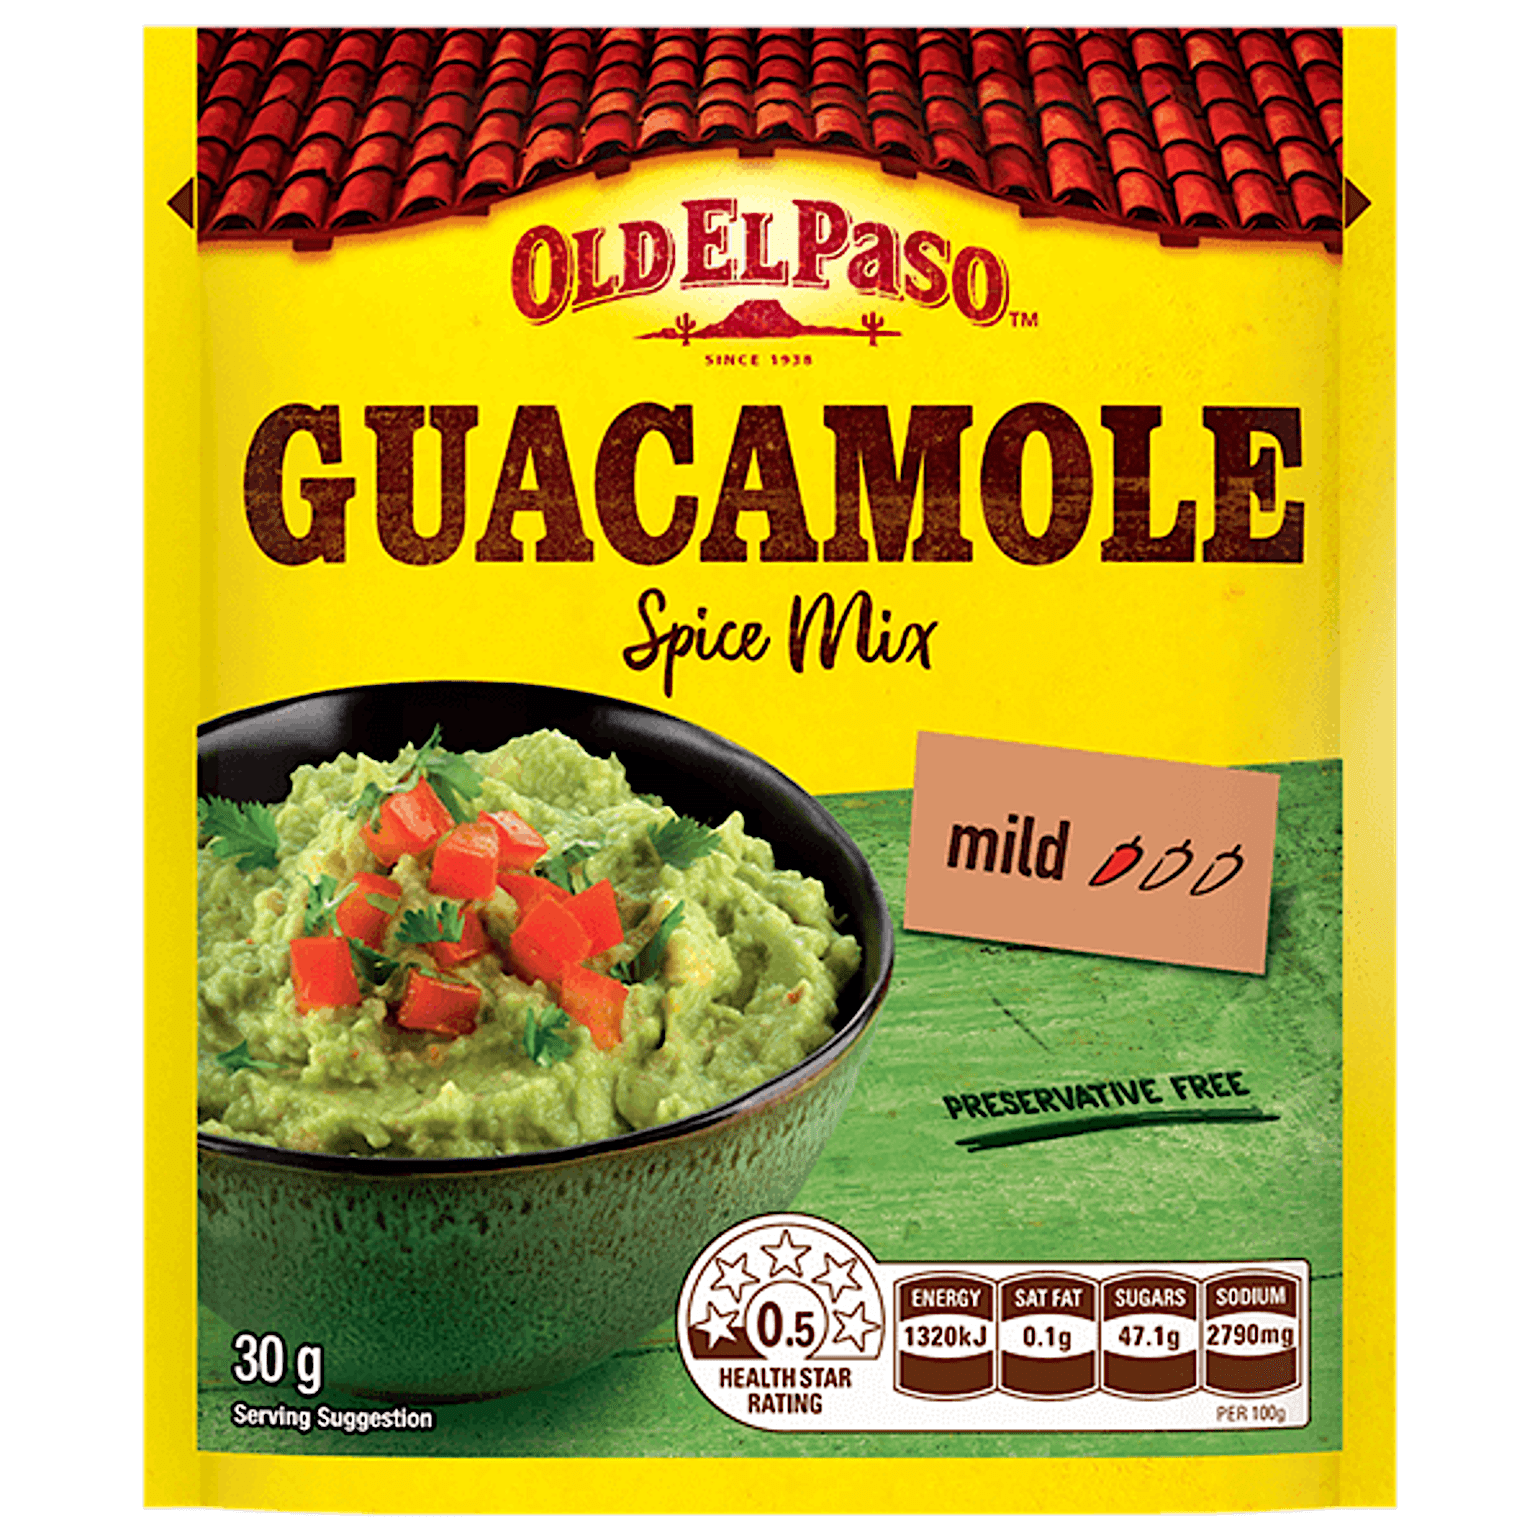 a pack of Old El Paso's mild guacamole spice mix (30g)